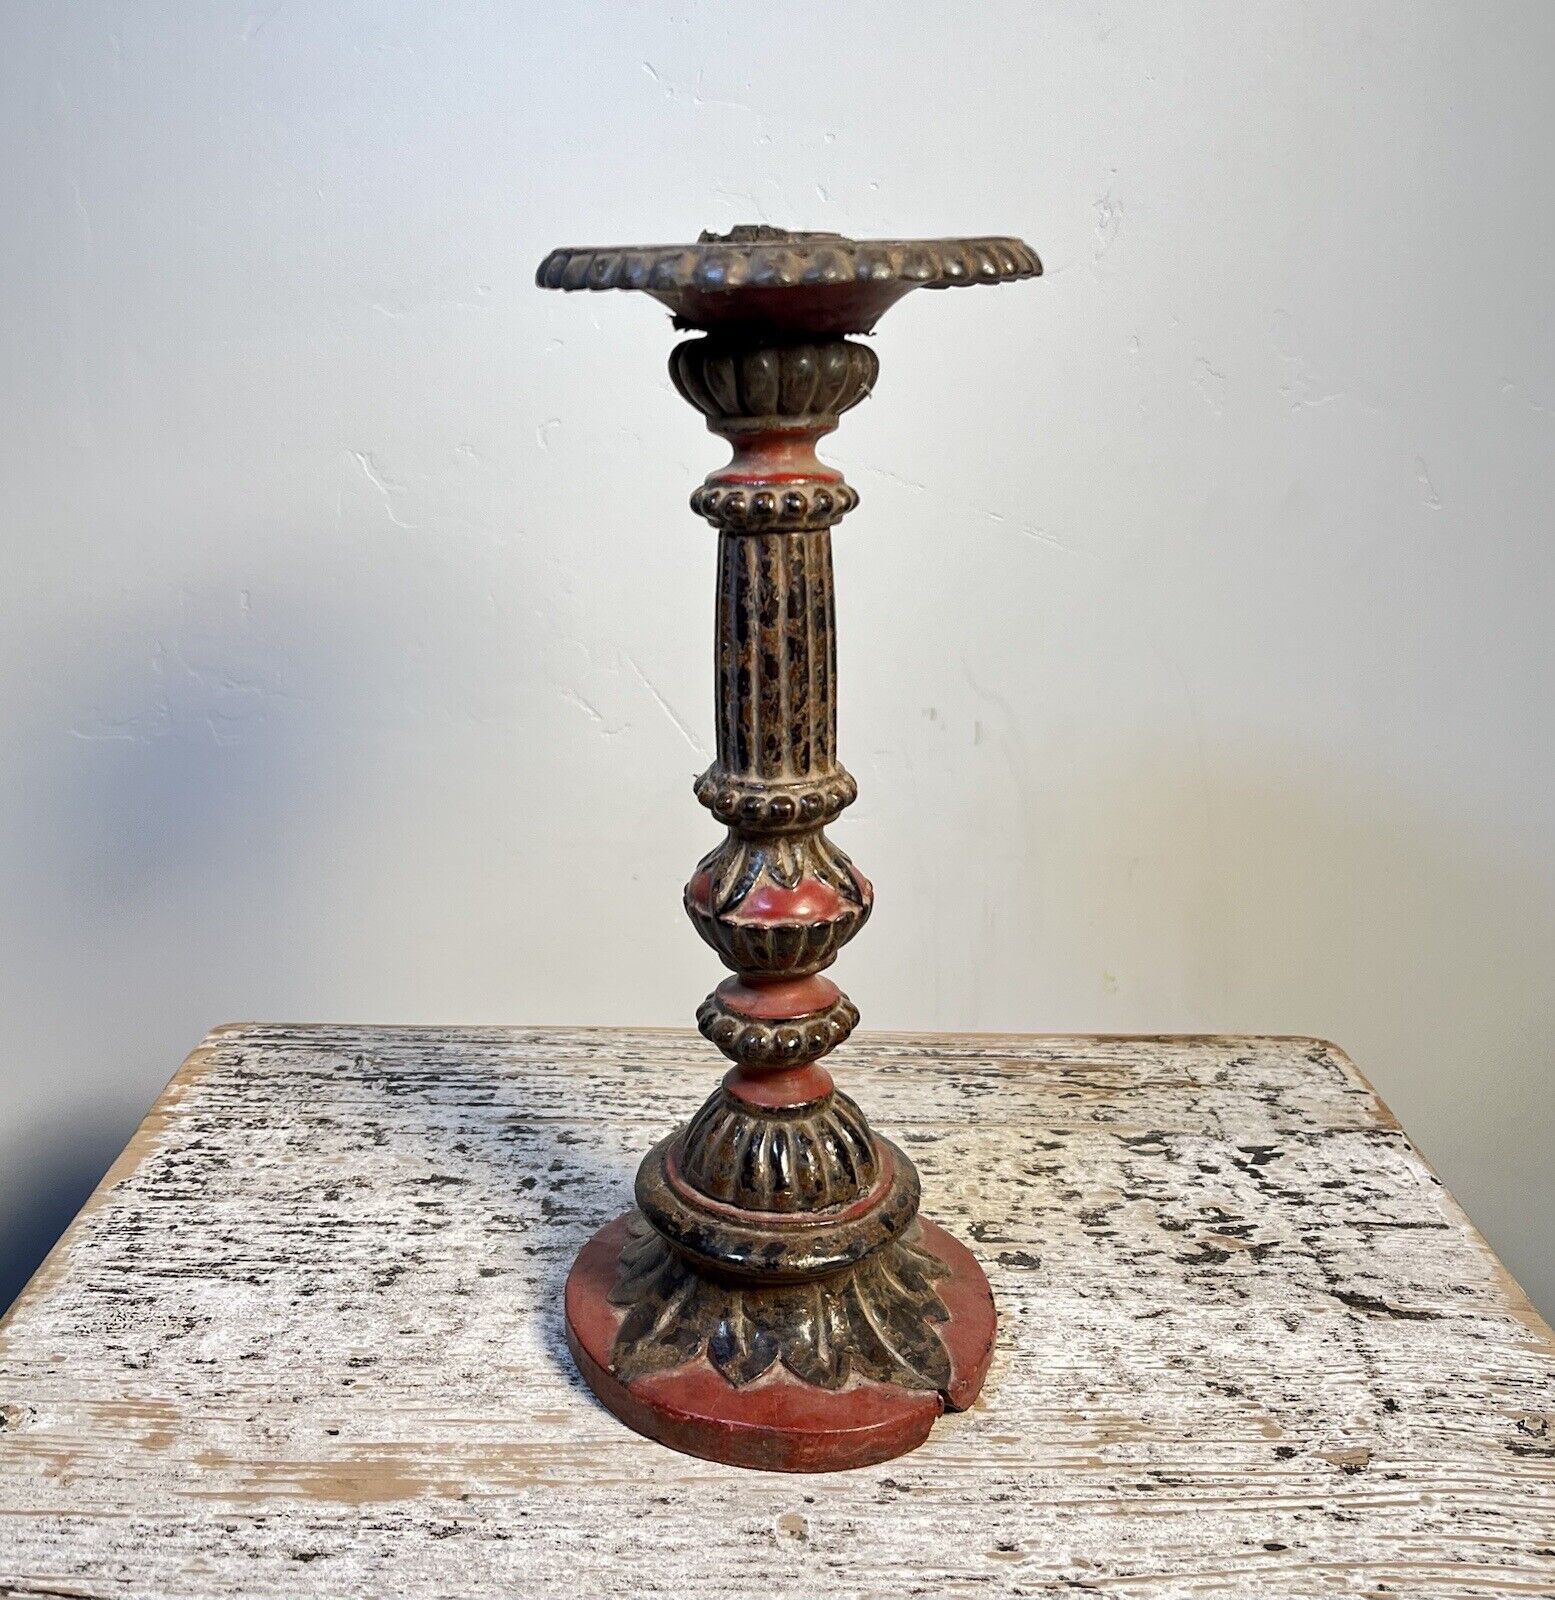 Antique Candlestick. N. Vietnam. 19th Century. Christian. French Influence. 11”t